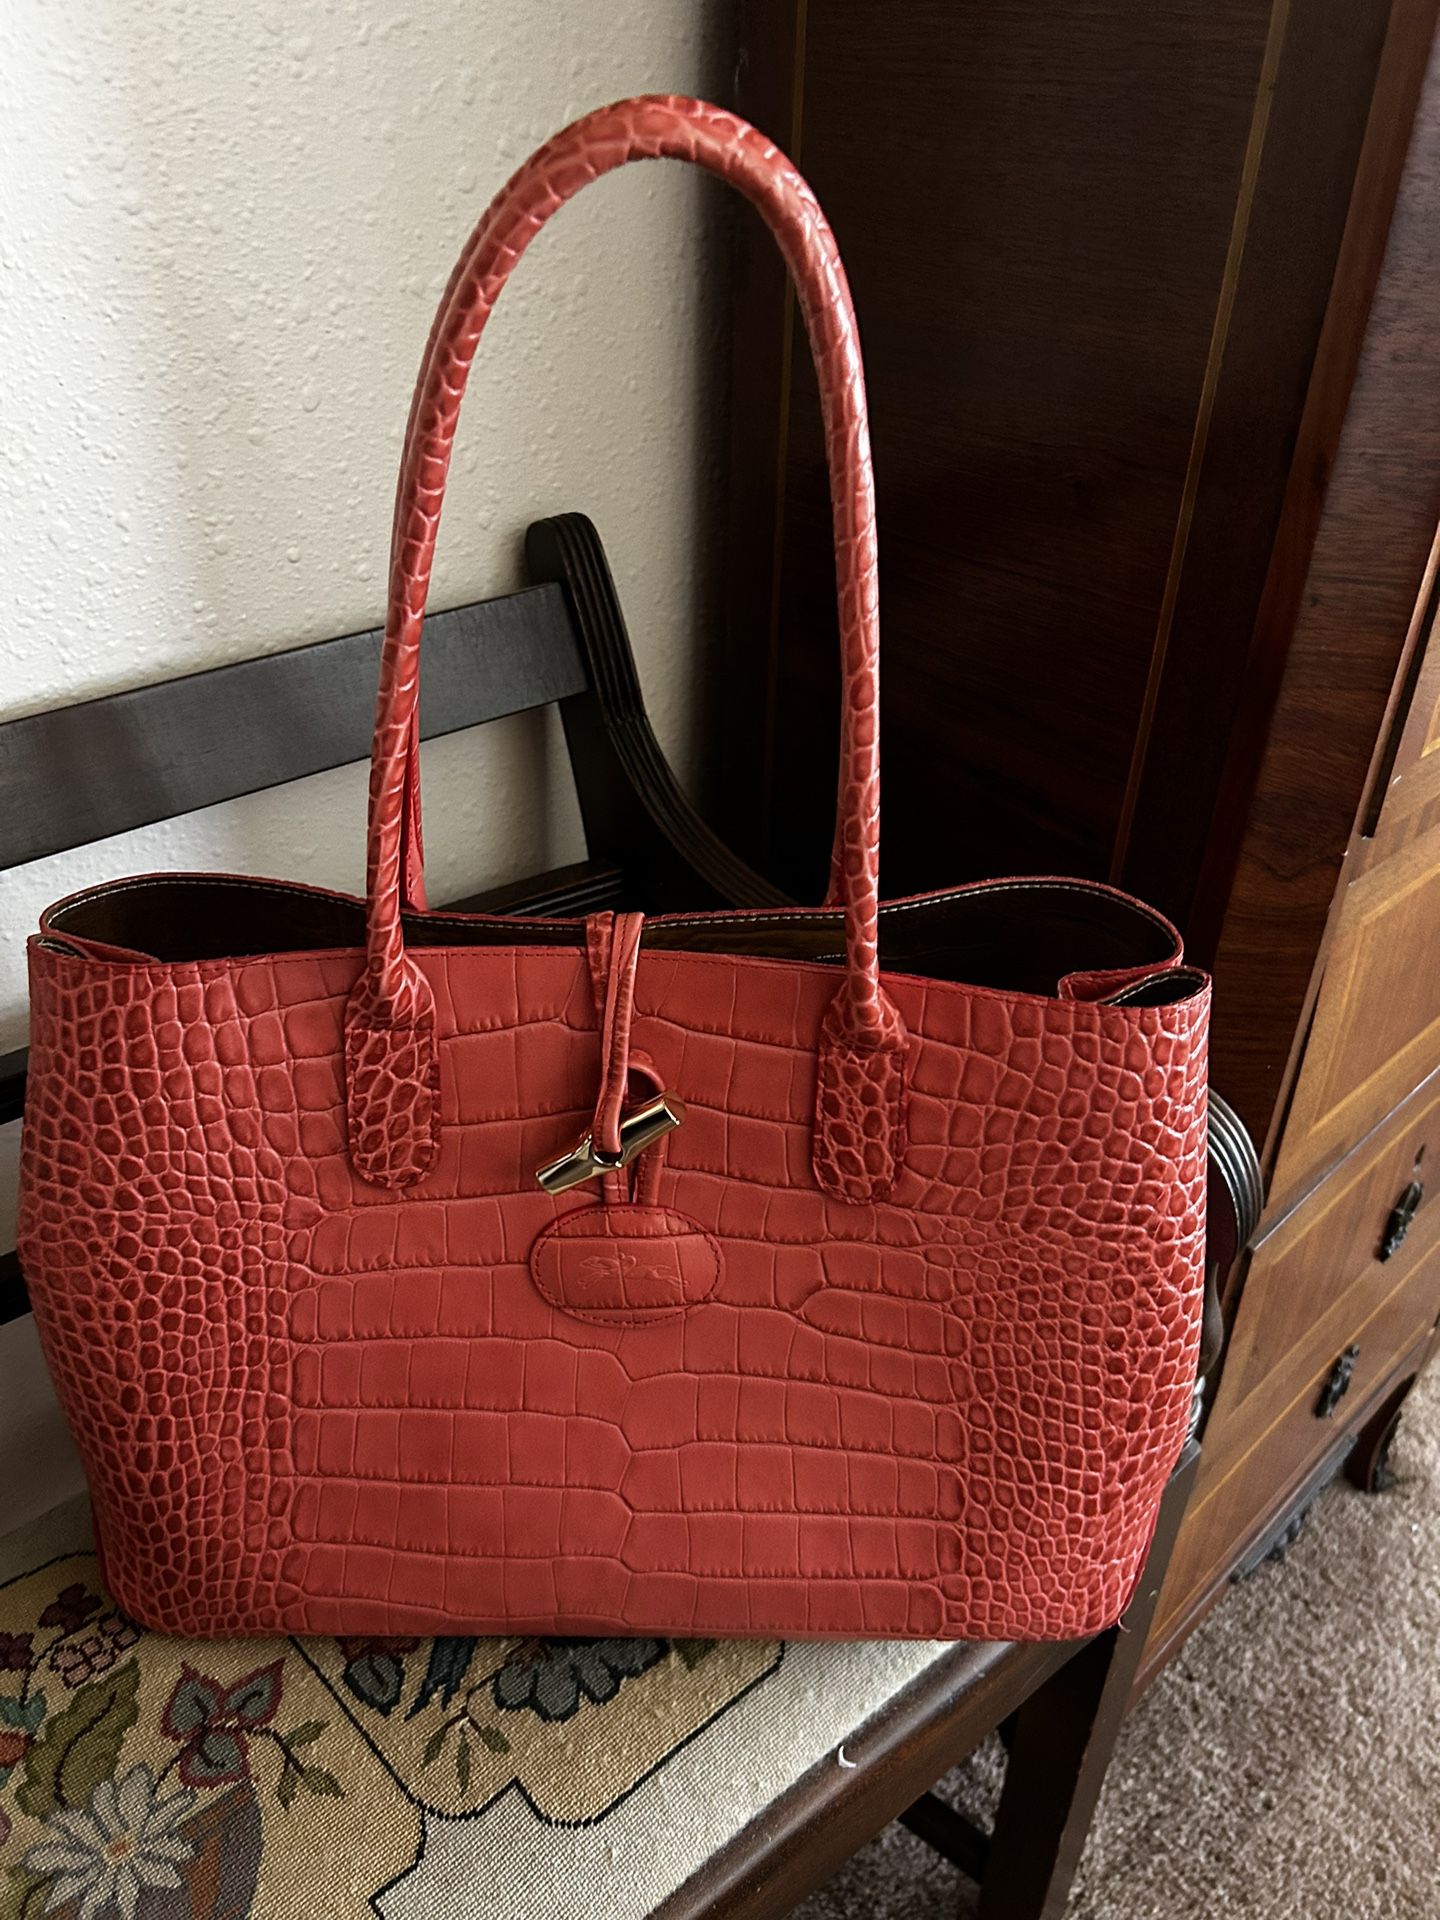 Longchamp Embossed Leather Tote Bag